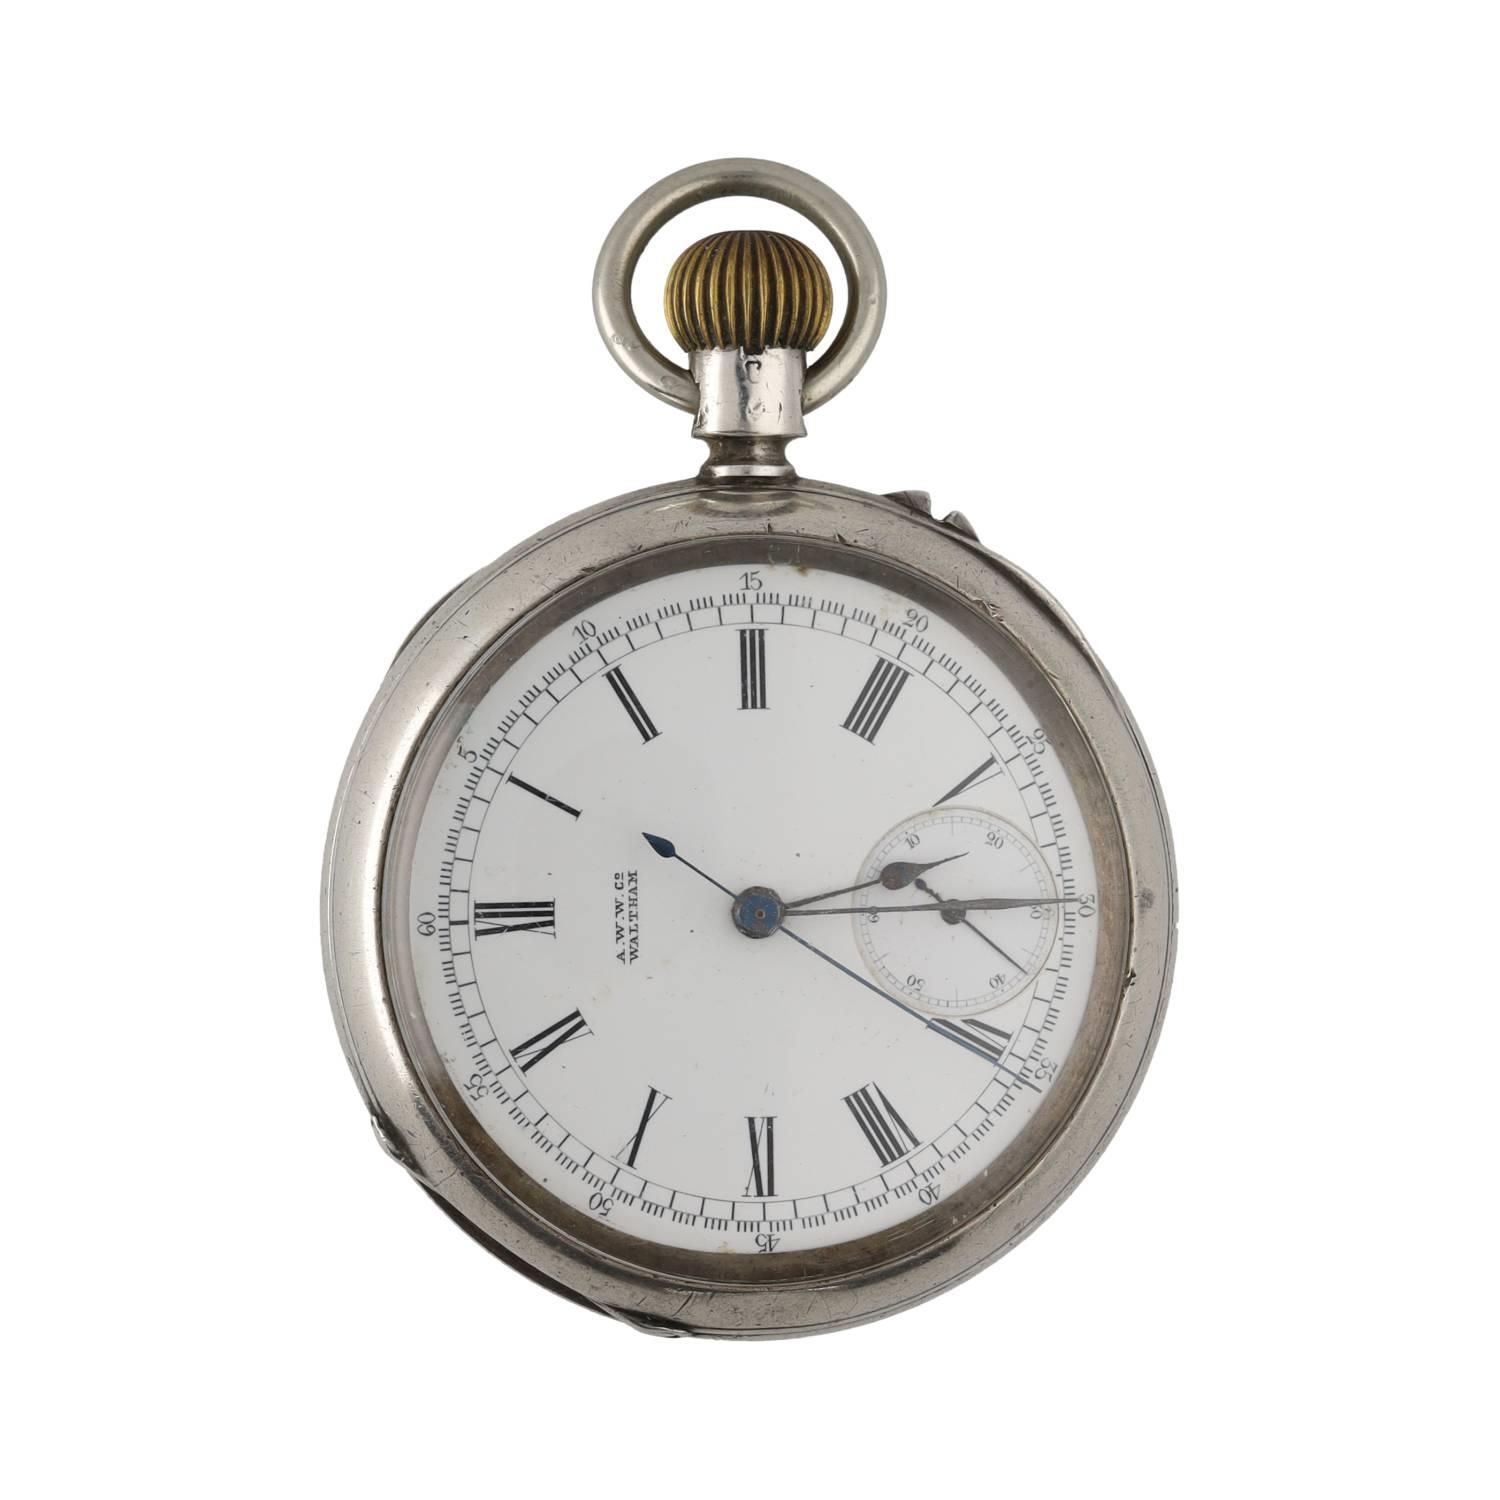 American Waltham silver chronograph lever pocket watch, circa 1886, serial no. 3127355, signed - Image 2 of 4